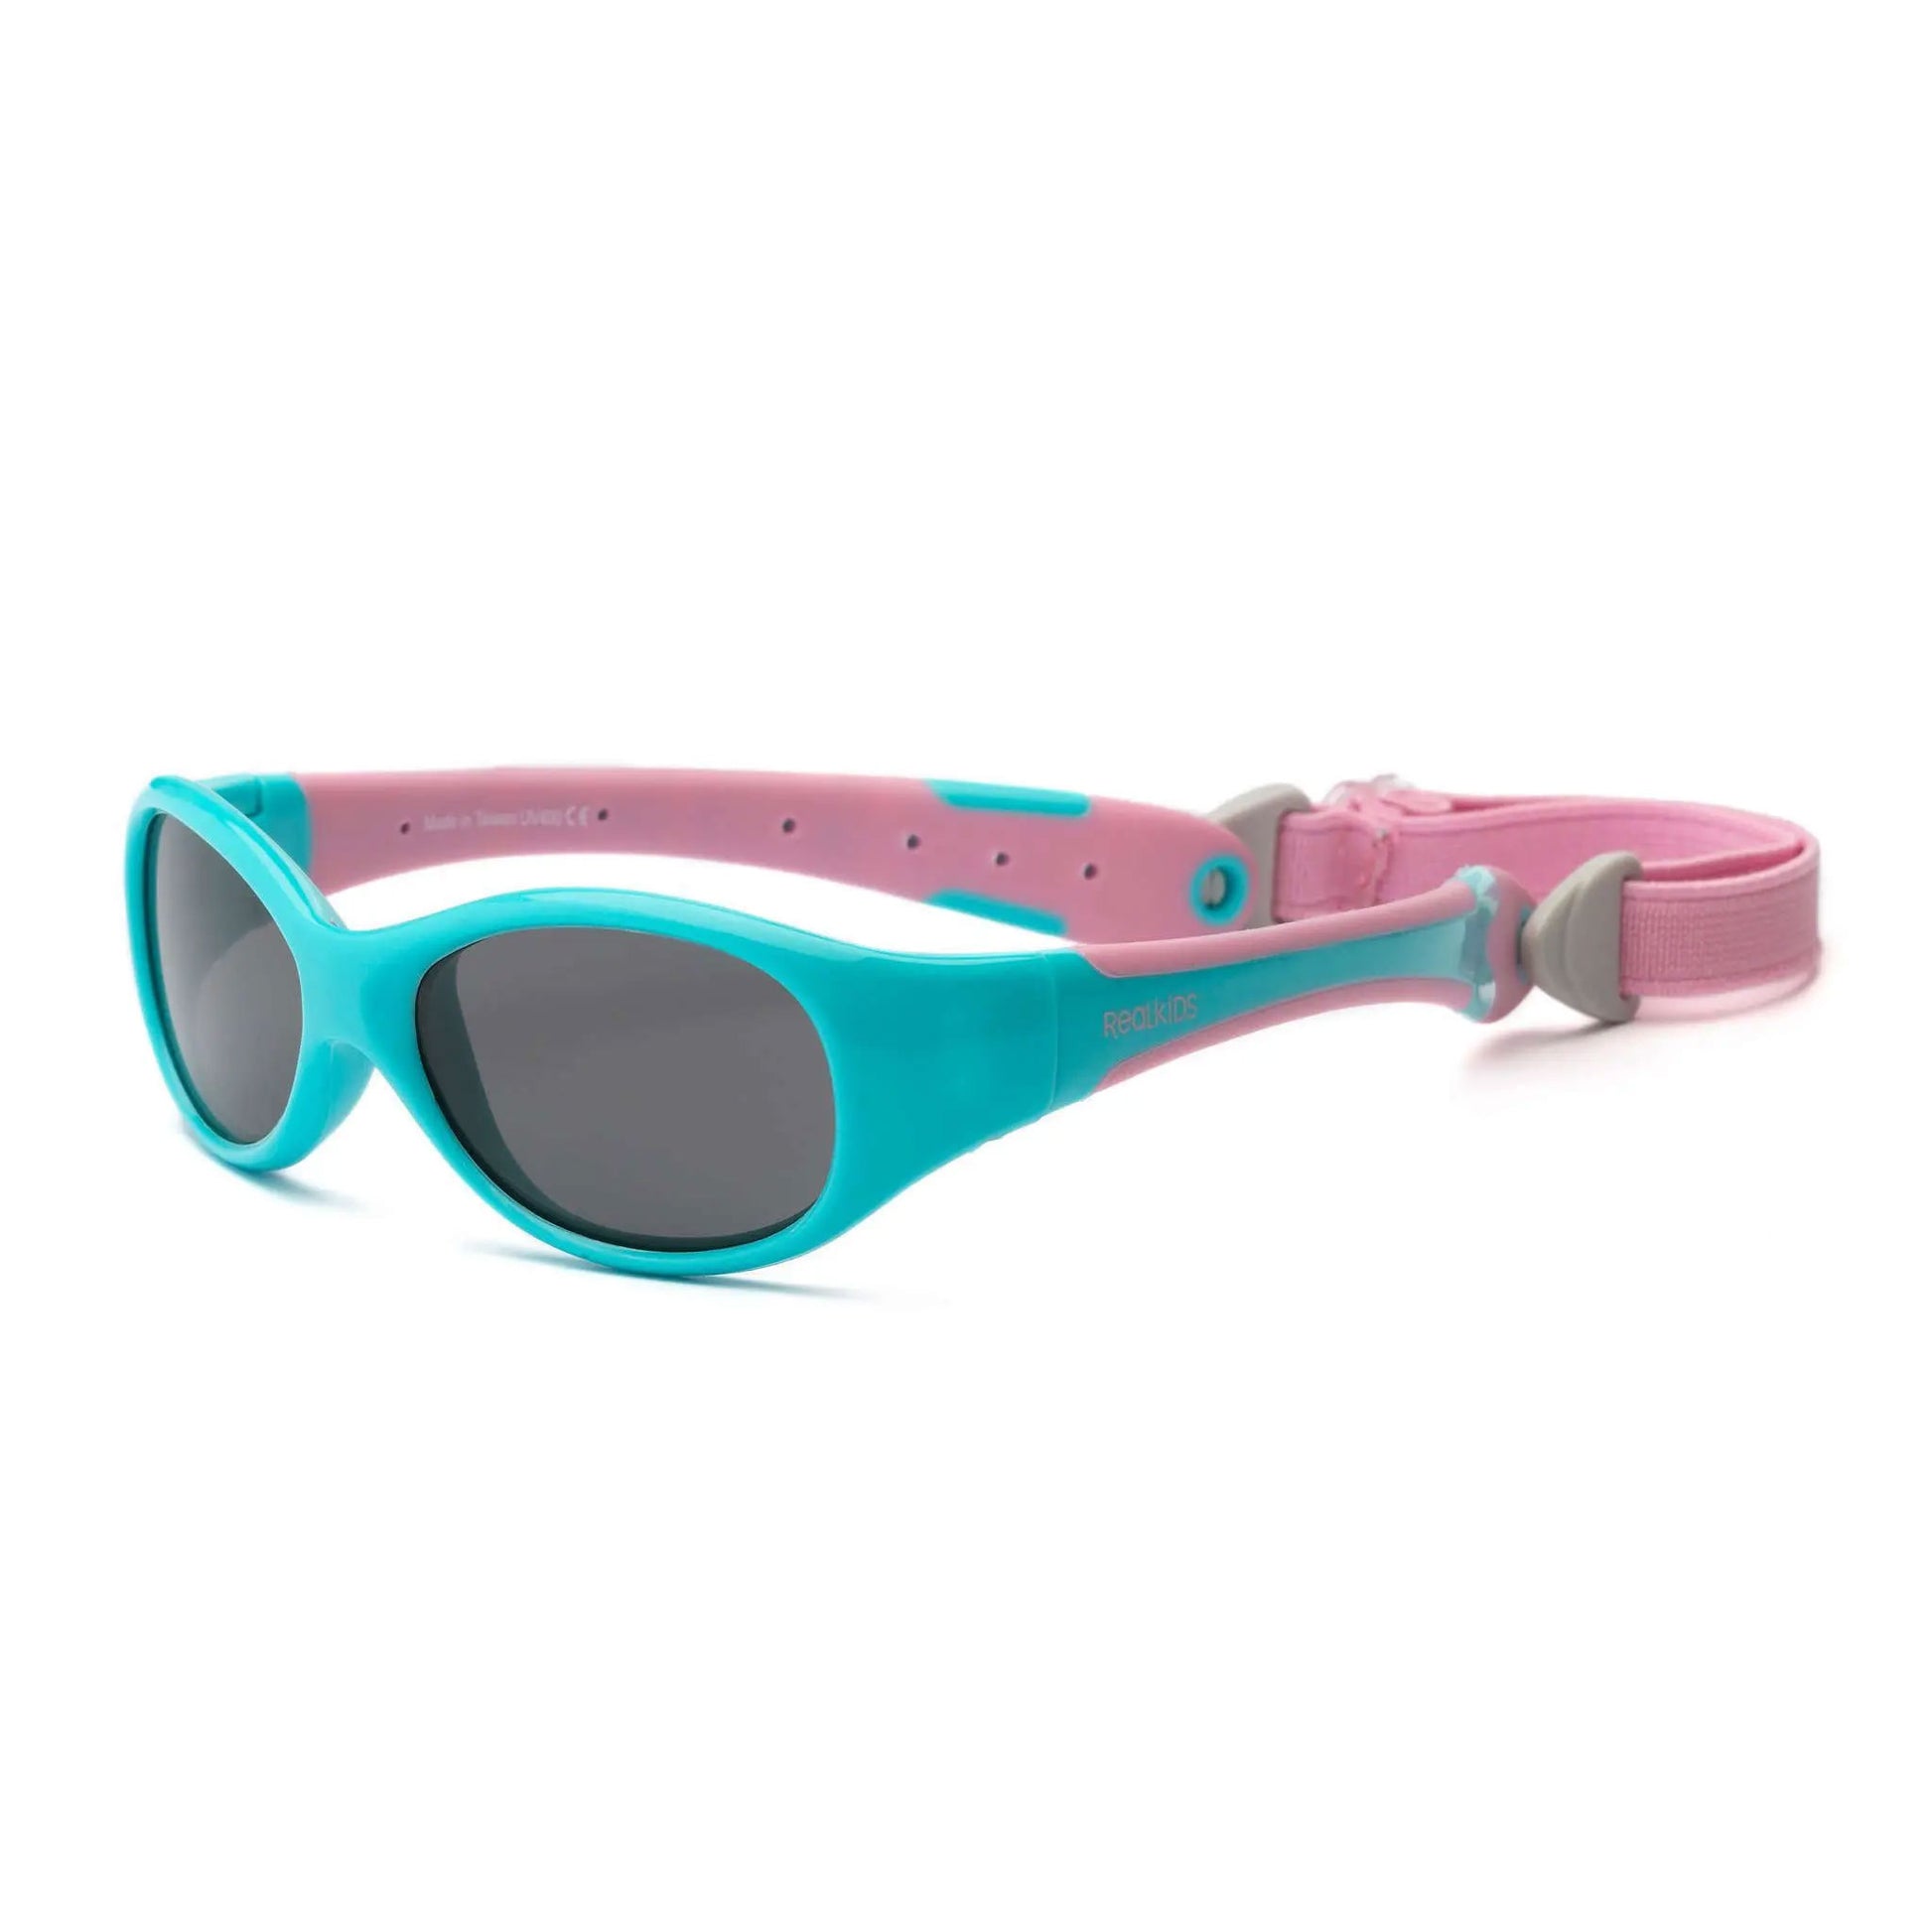 Real Shades Explorer Sunglasses for babies and young children. Unbreakable, 100% UVA UVB Protection. Features a wraparound frame that is perfect for minimising peripheral light.